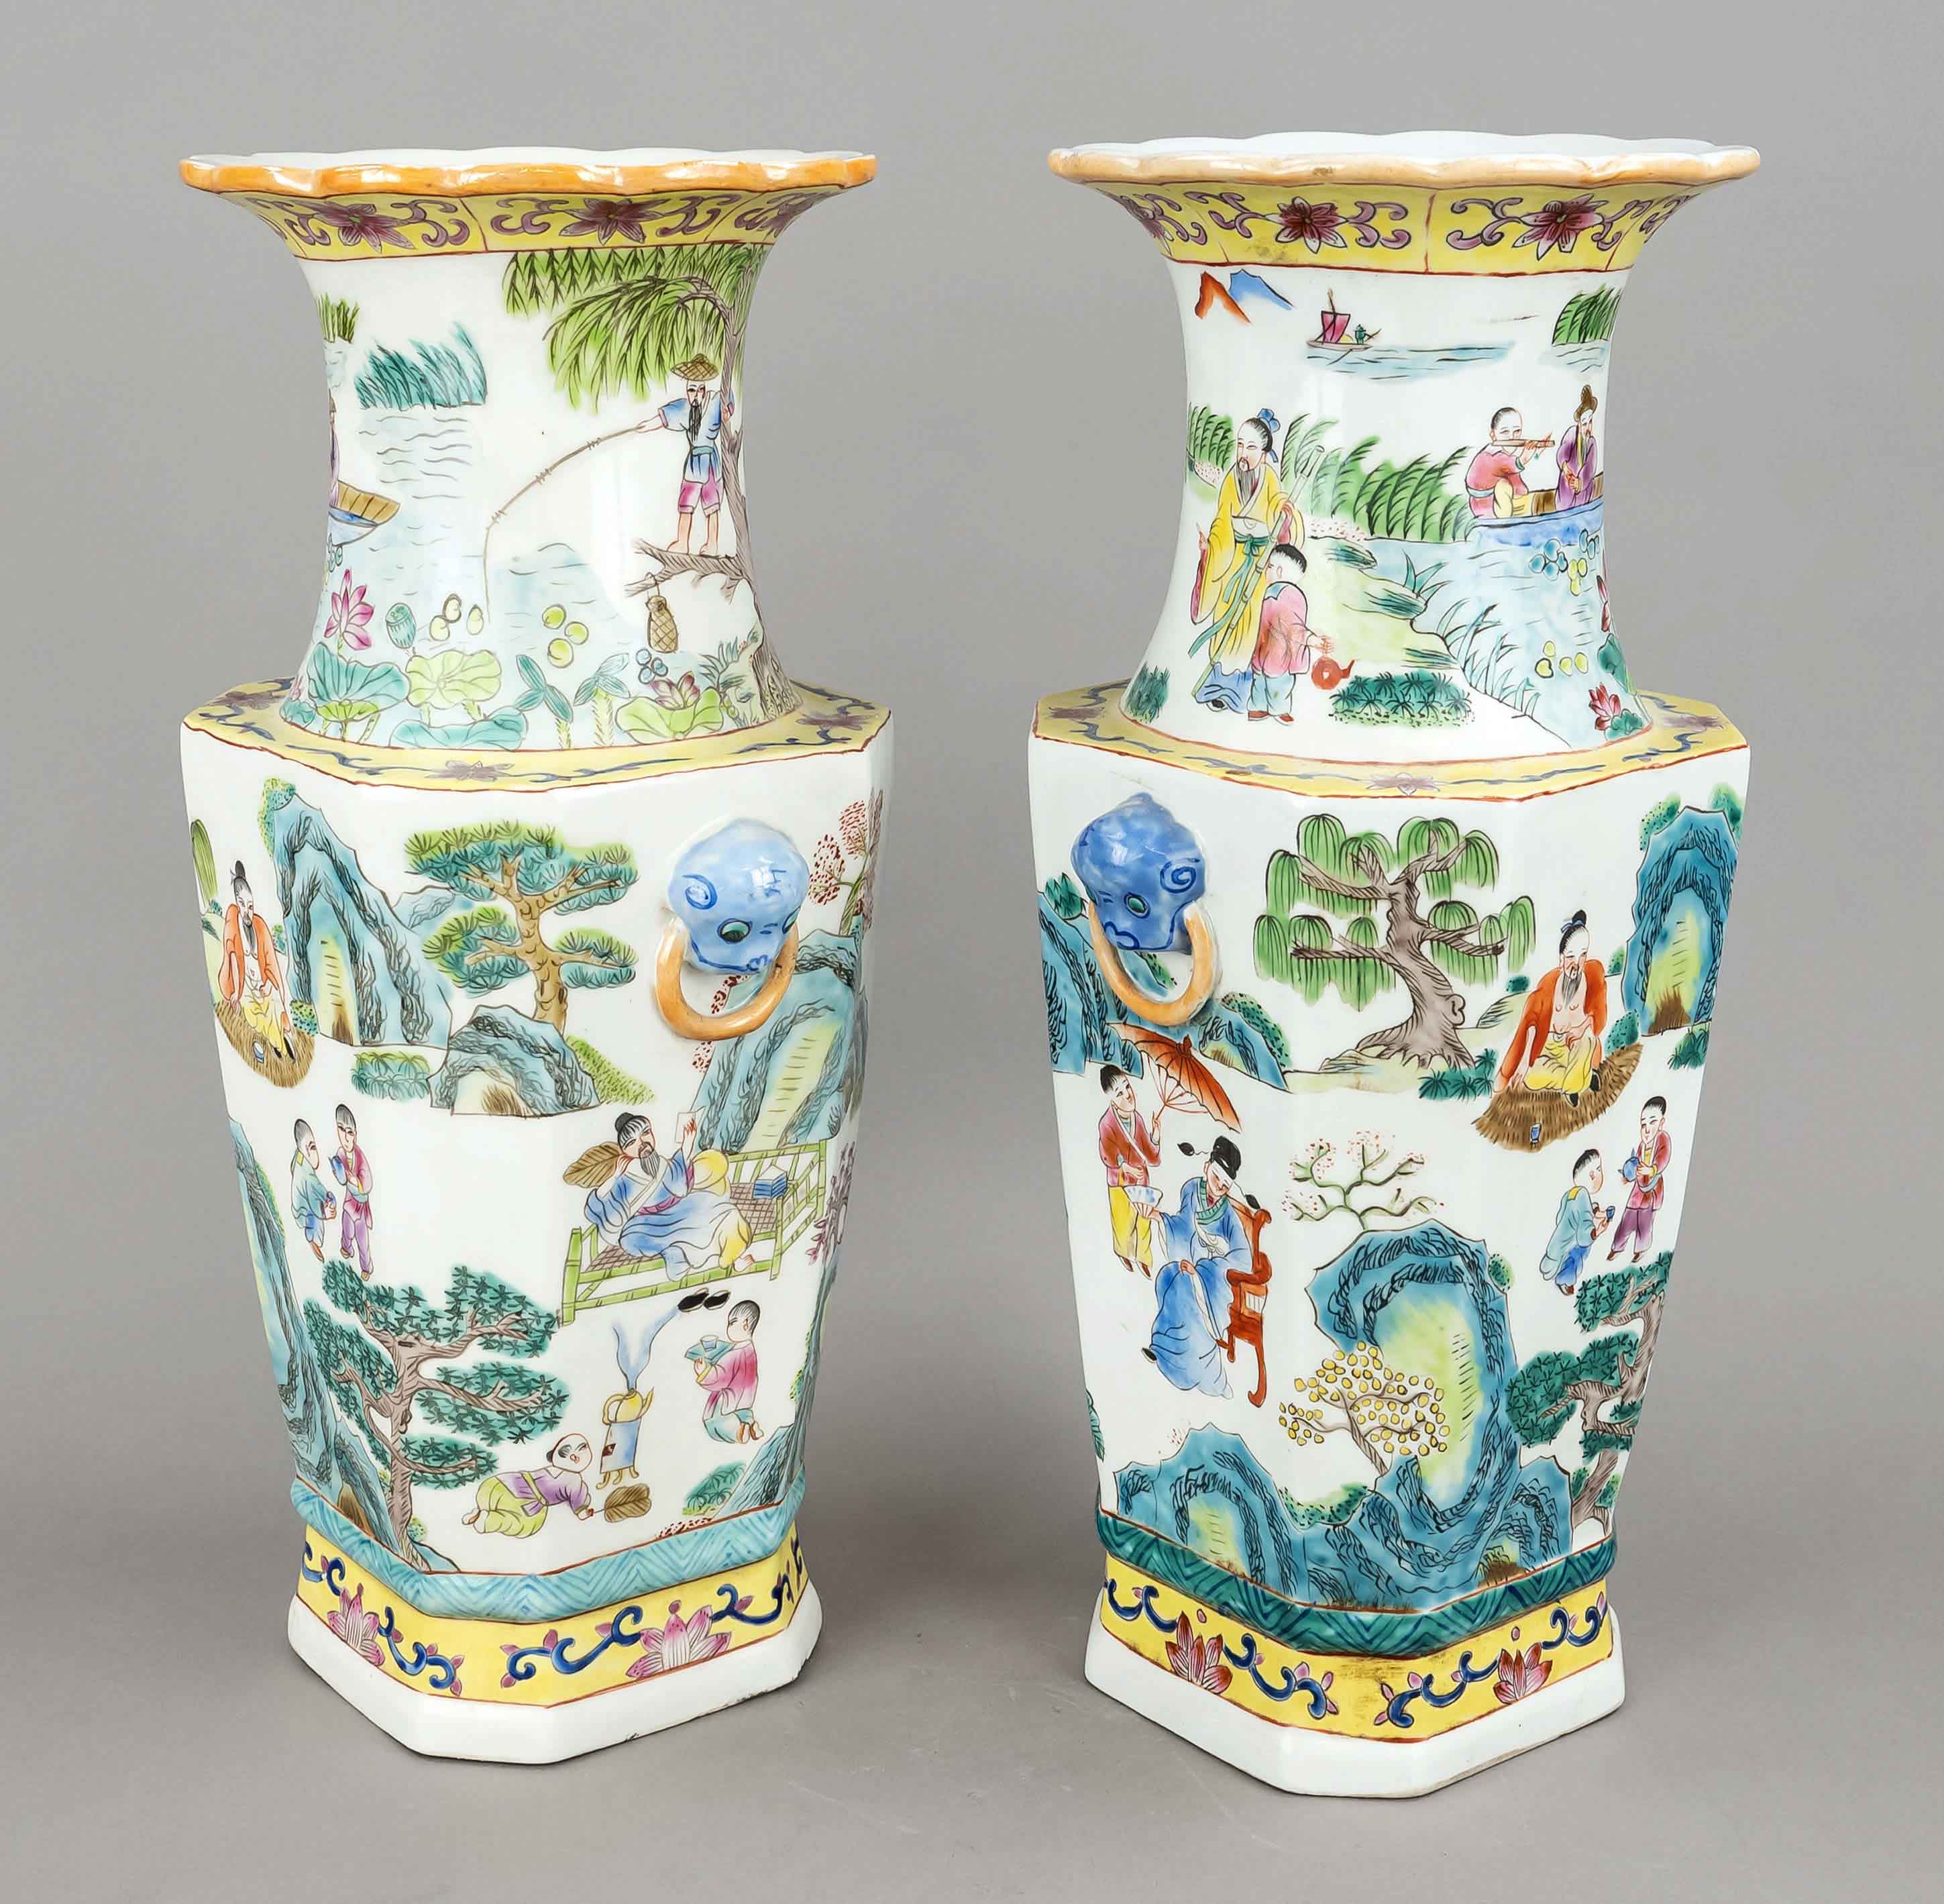 Pair of large vases, China, 20th century, porcelain with polychrome glaze decoration in famille-rose - Image 2 of 3